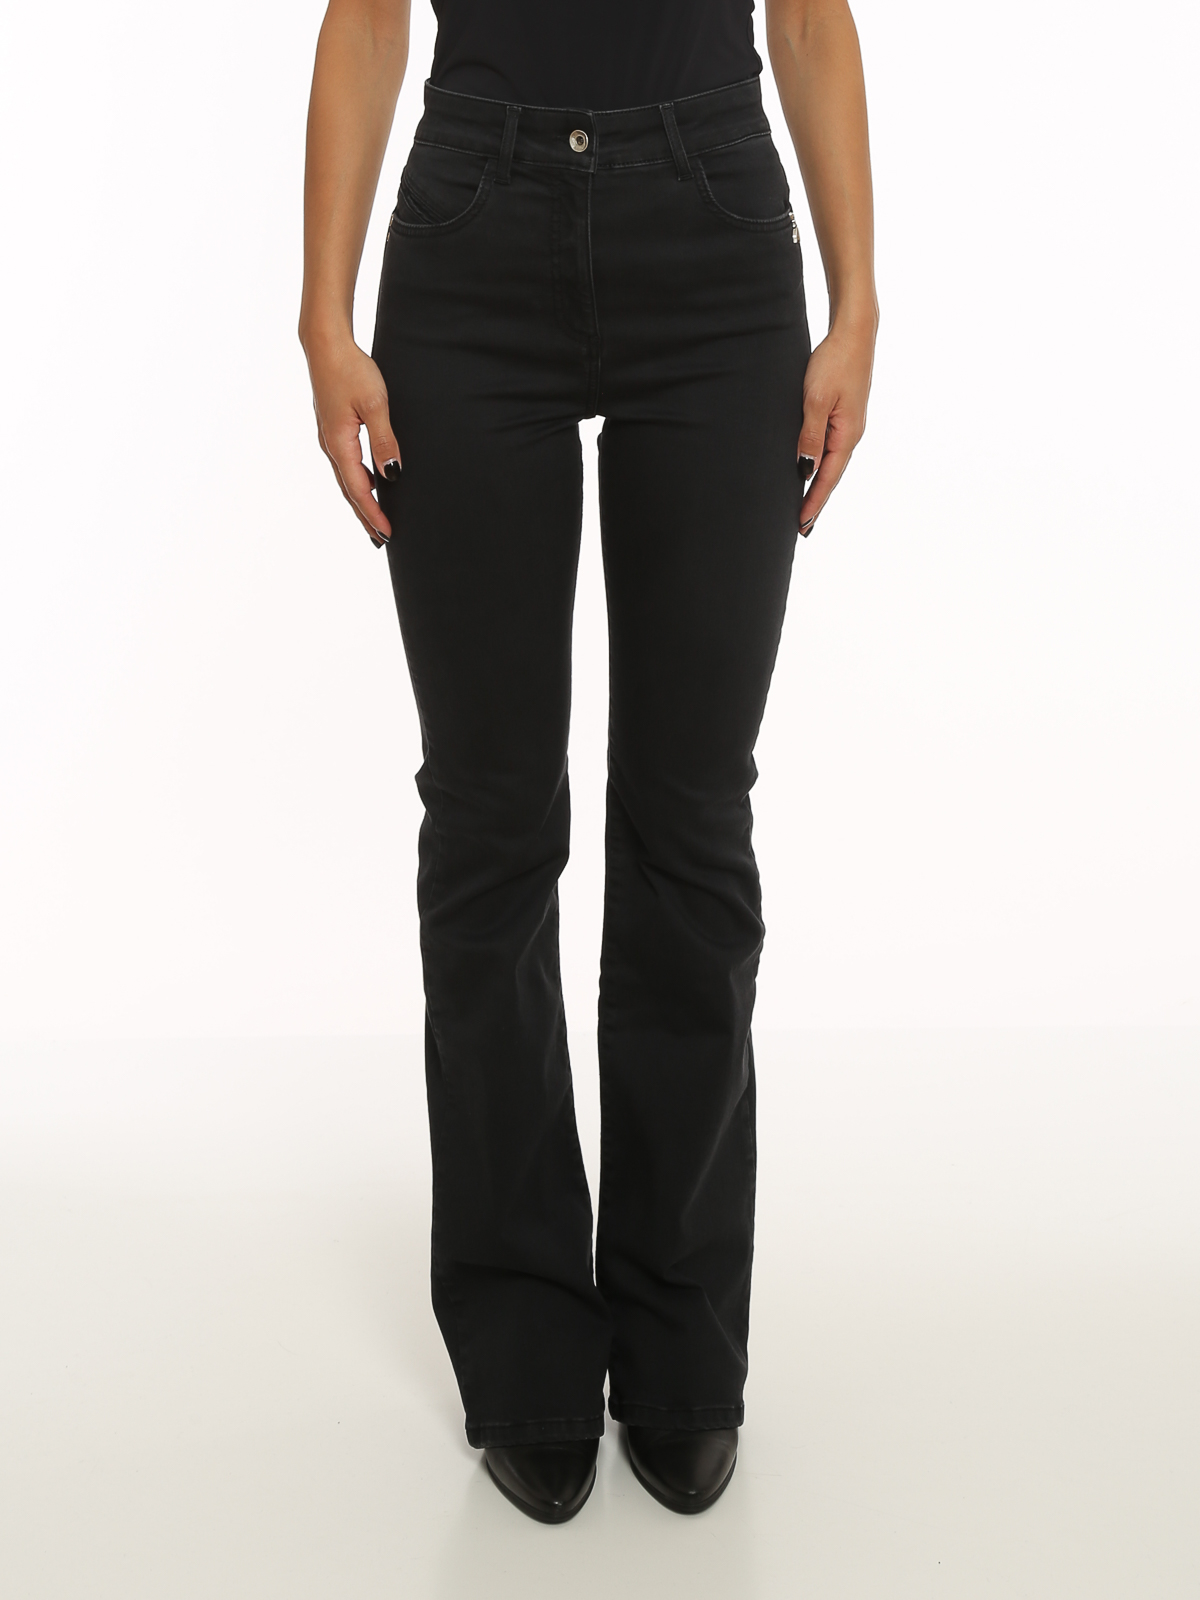 Antarctica Picasso Betsy Trotwood Bootcut jeans Patrizia Pepe - Mid-rise bootcut jeans - CJ0937A1HINK112